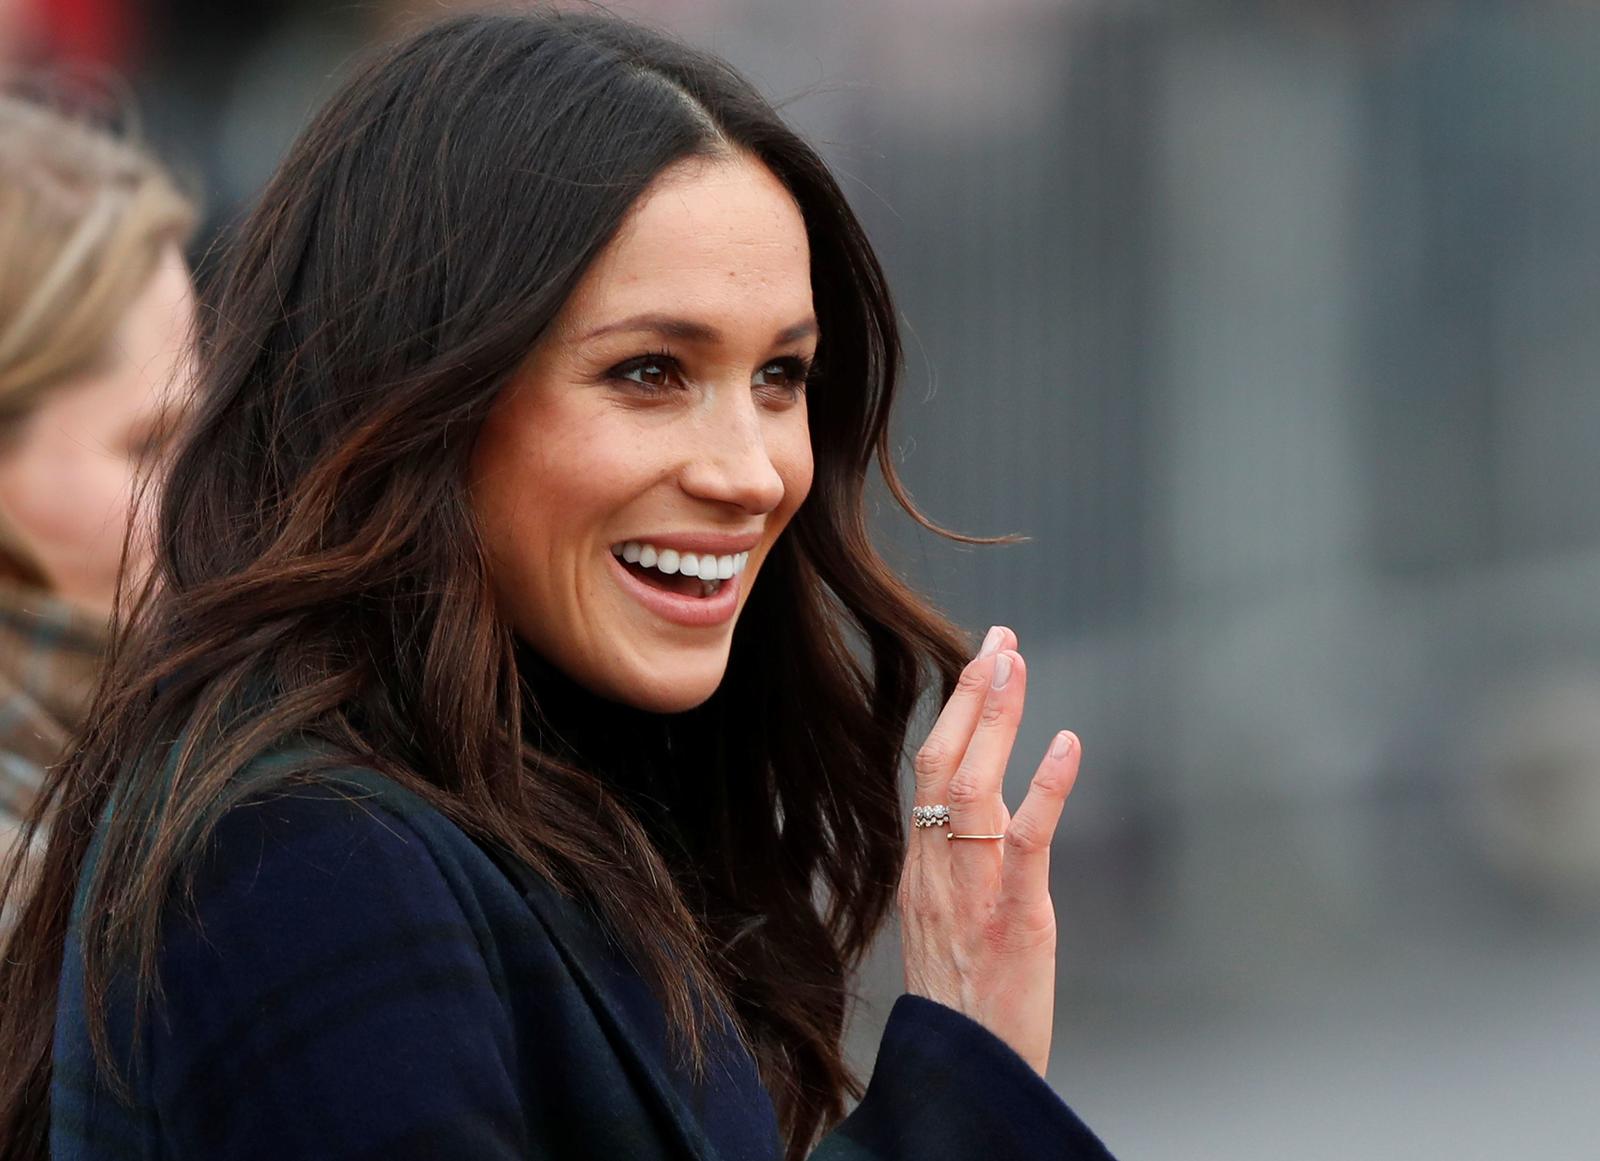 Meghan Markle, fiancee of Britain’s Prince Harry, waves as she arrives for a visit to Edinburgh